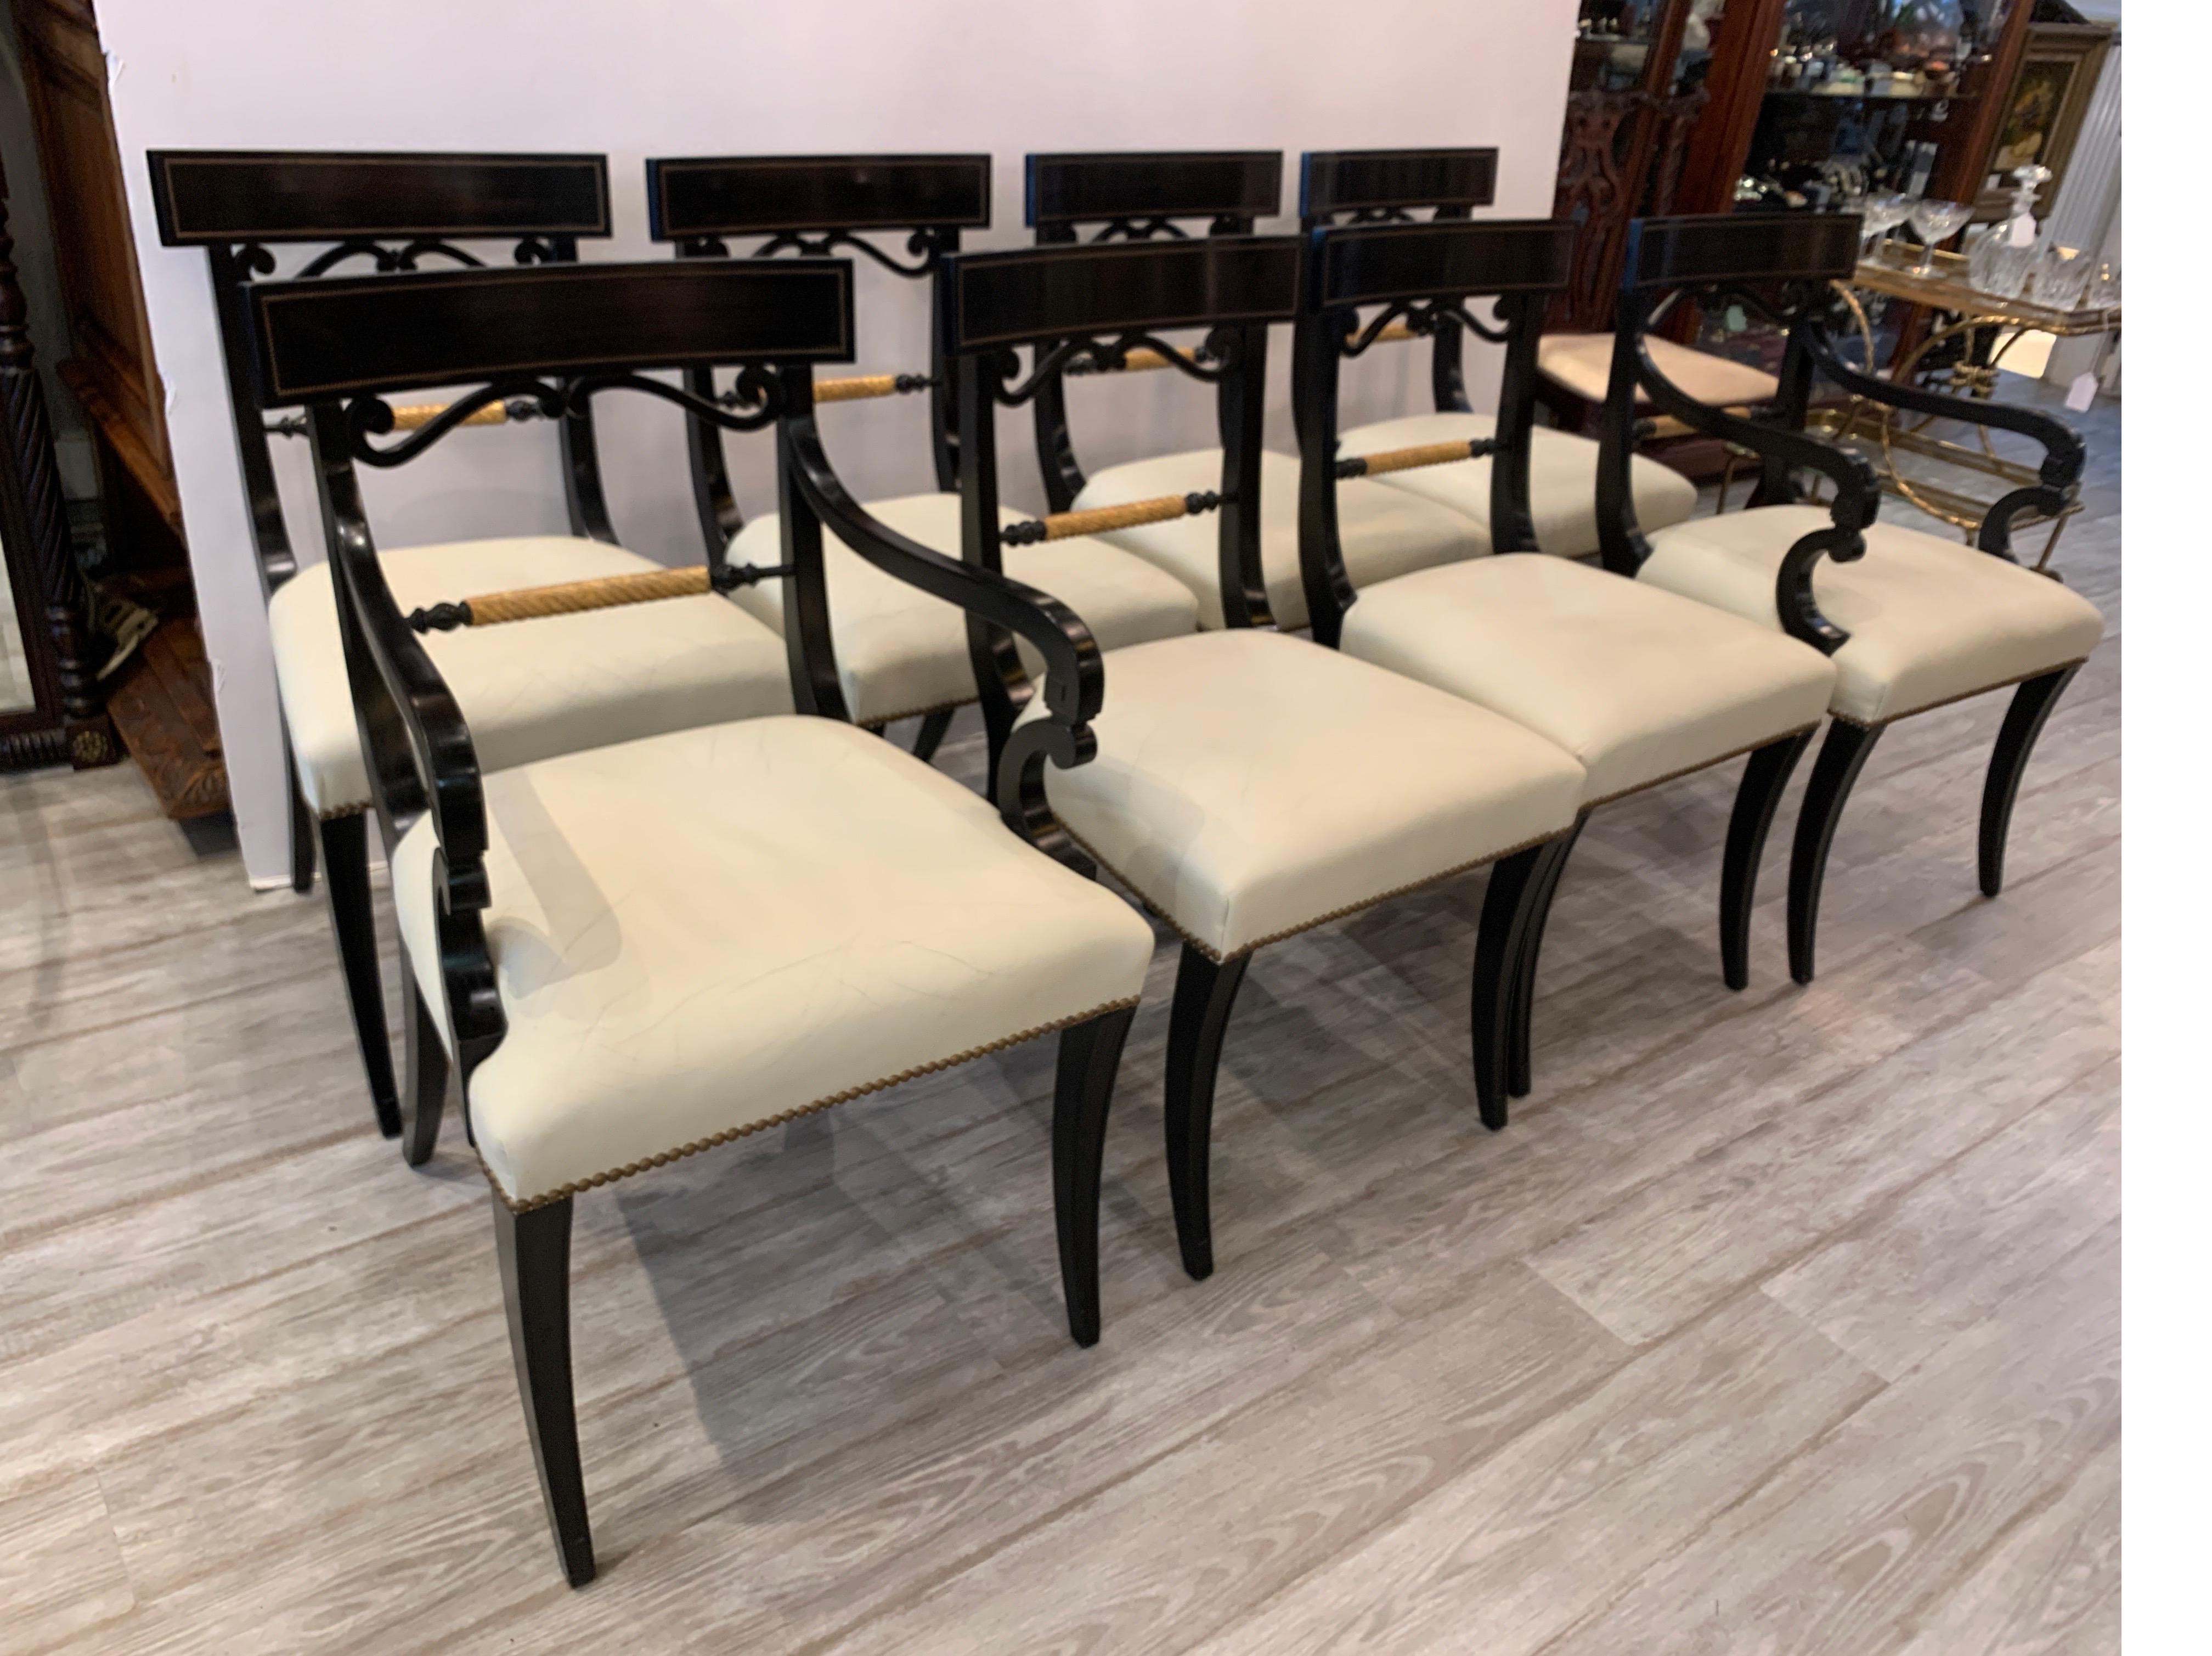 Elegant set of eight Regency style dining chairs, ebonized with gold gilt highlights and original cream leather seats. Brass nailhead trim and elegantly curved and tapered legs give this set of two arm chairs and six side chairs a distinguished